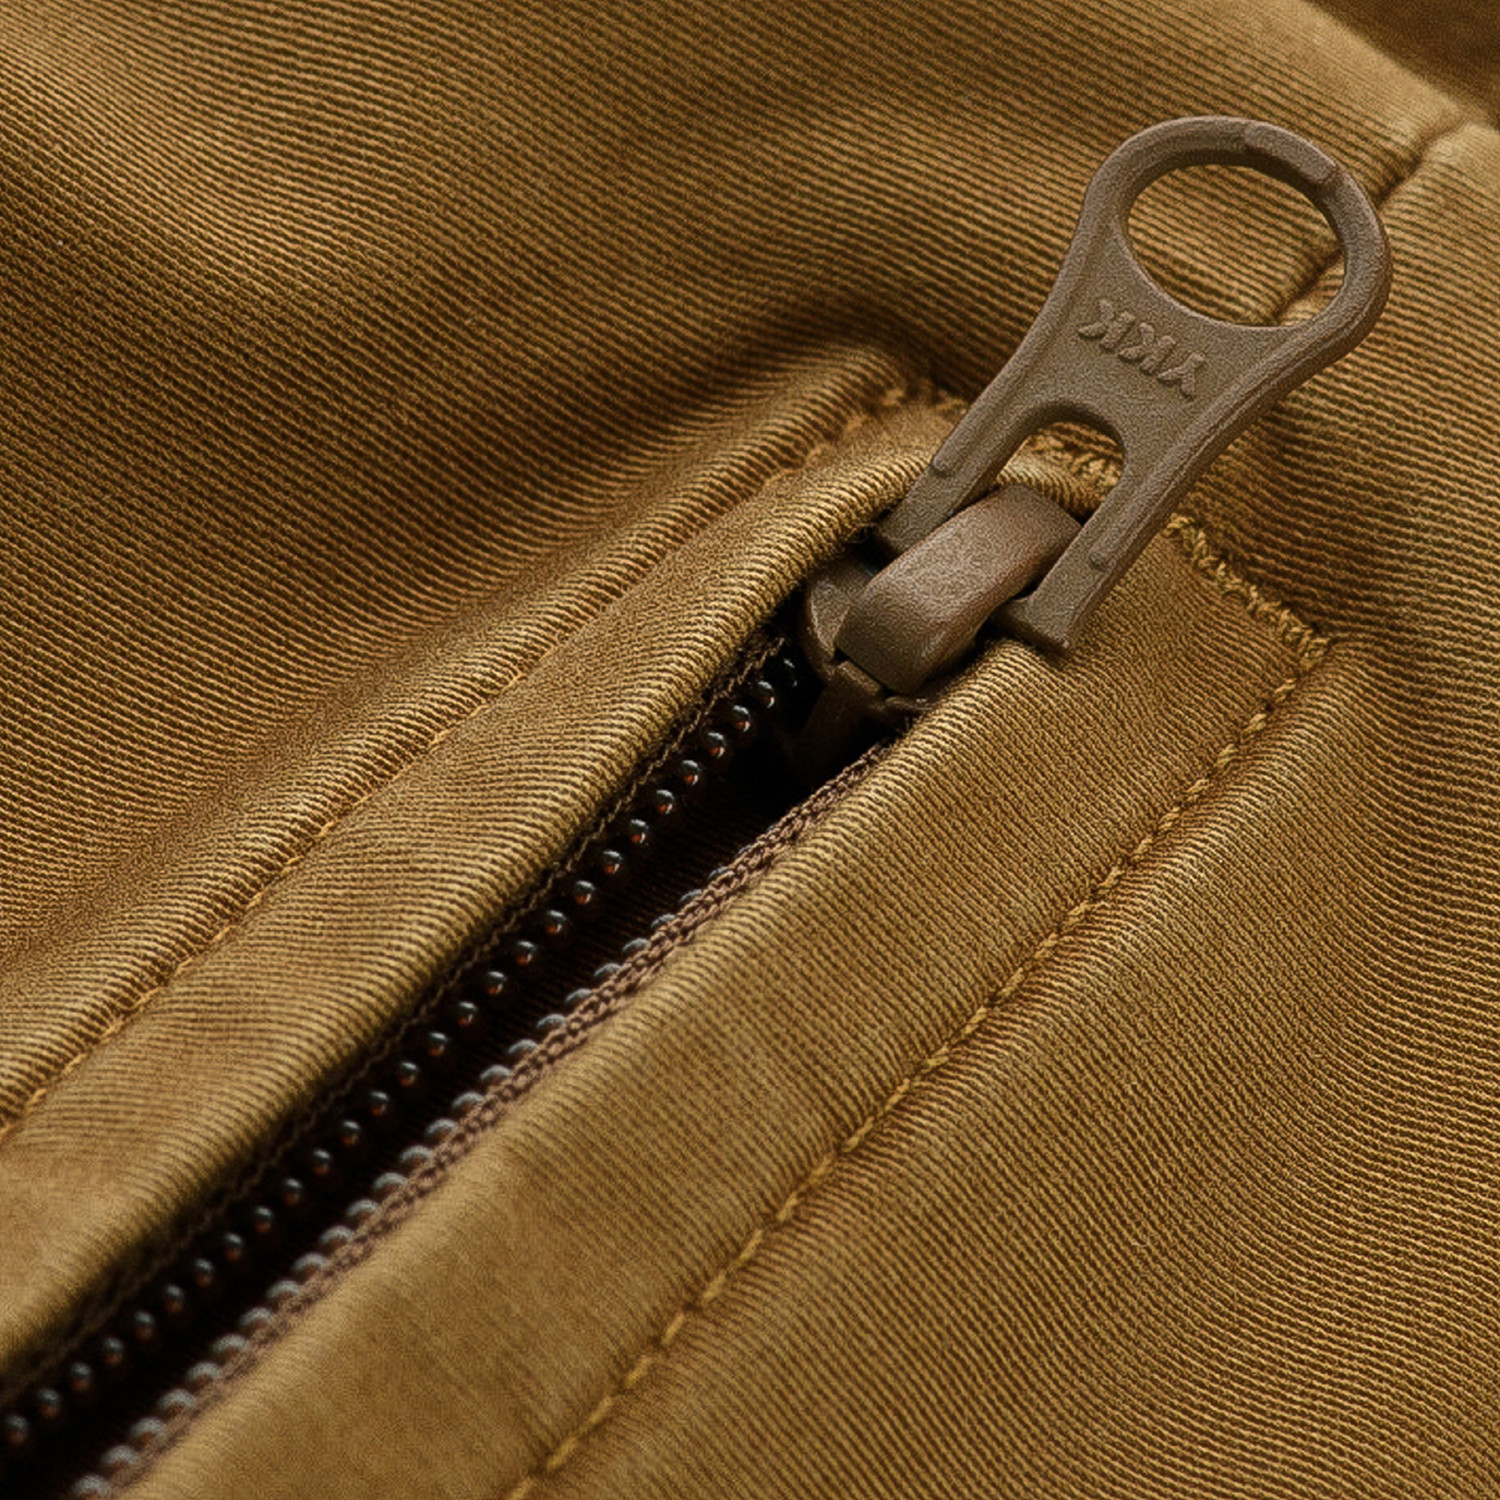 Shasta Shorts // Coyote Brown (S) - M-Tac - Touch of Modern